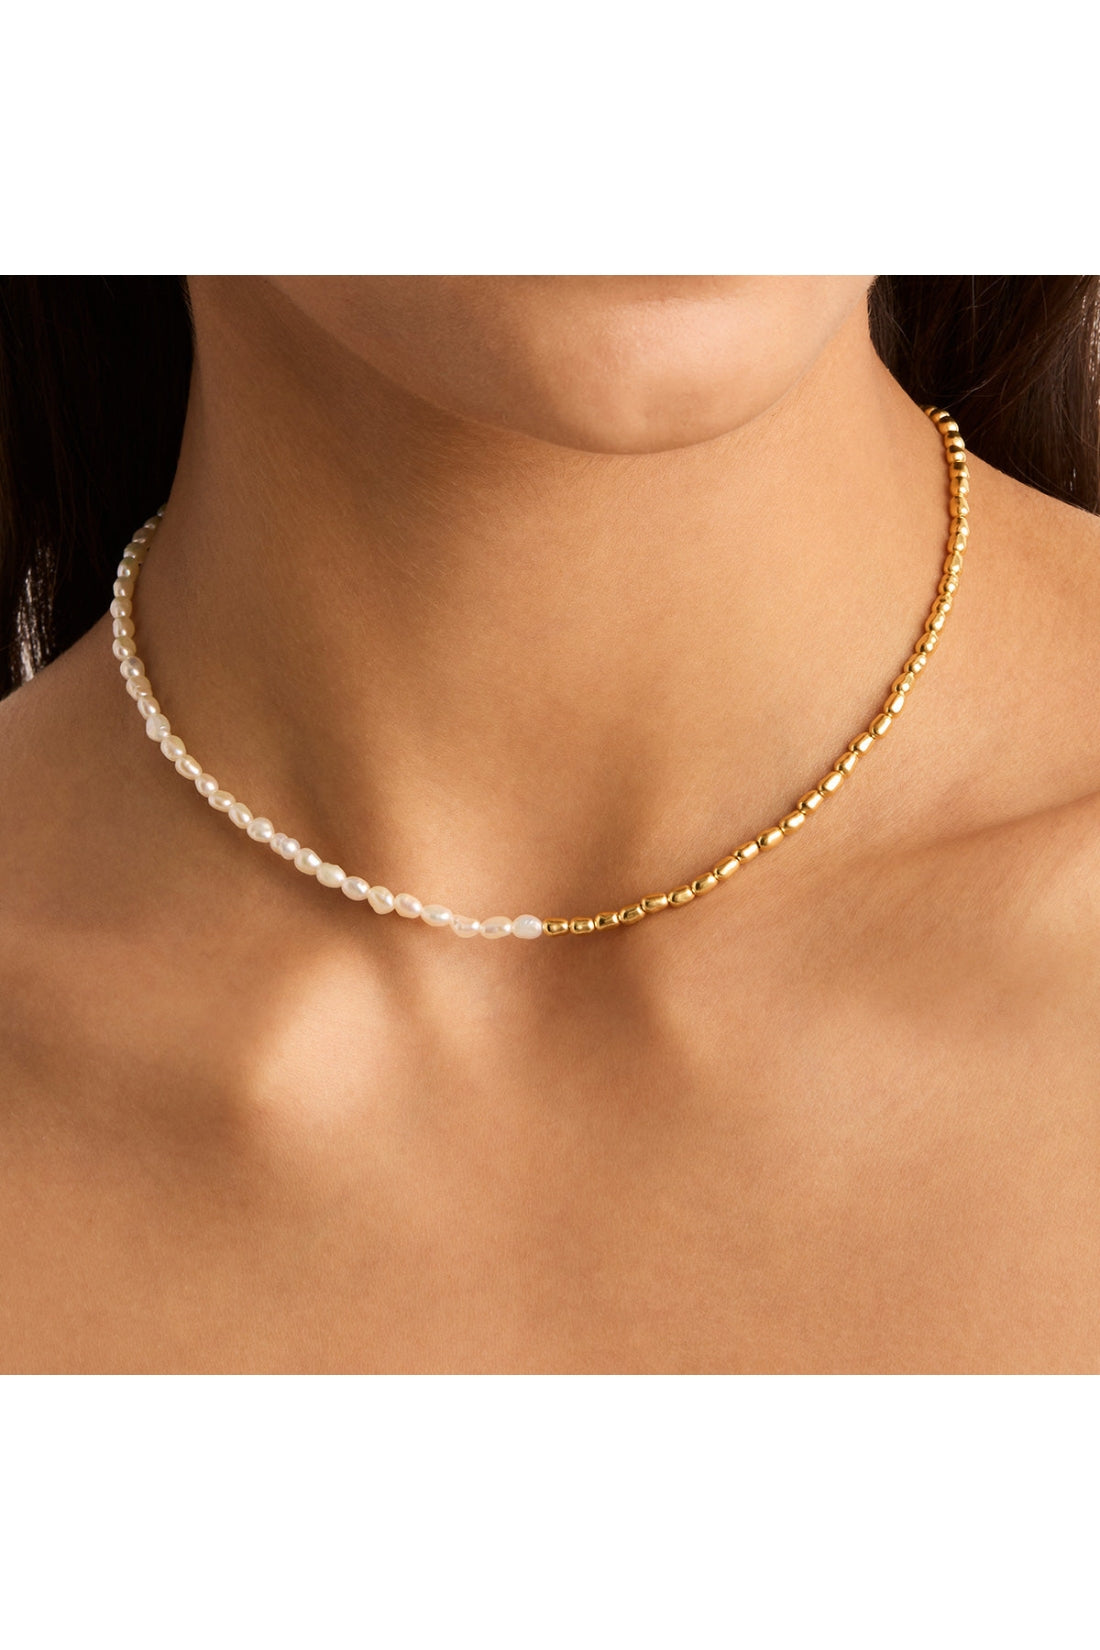 BY YOUR SIDE PEARL CHOKER